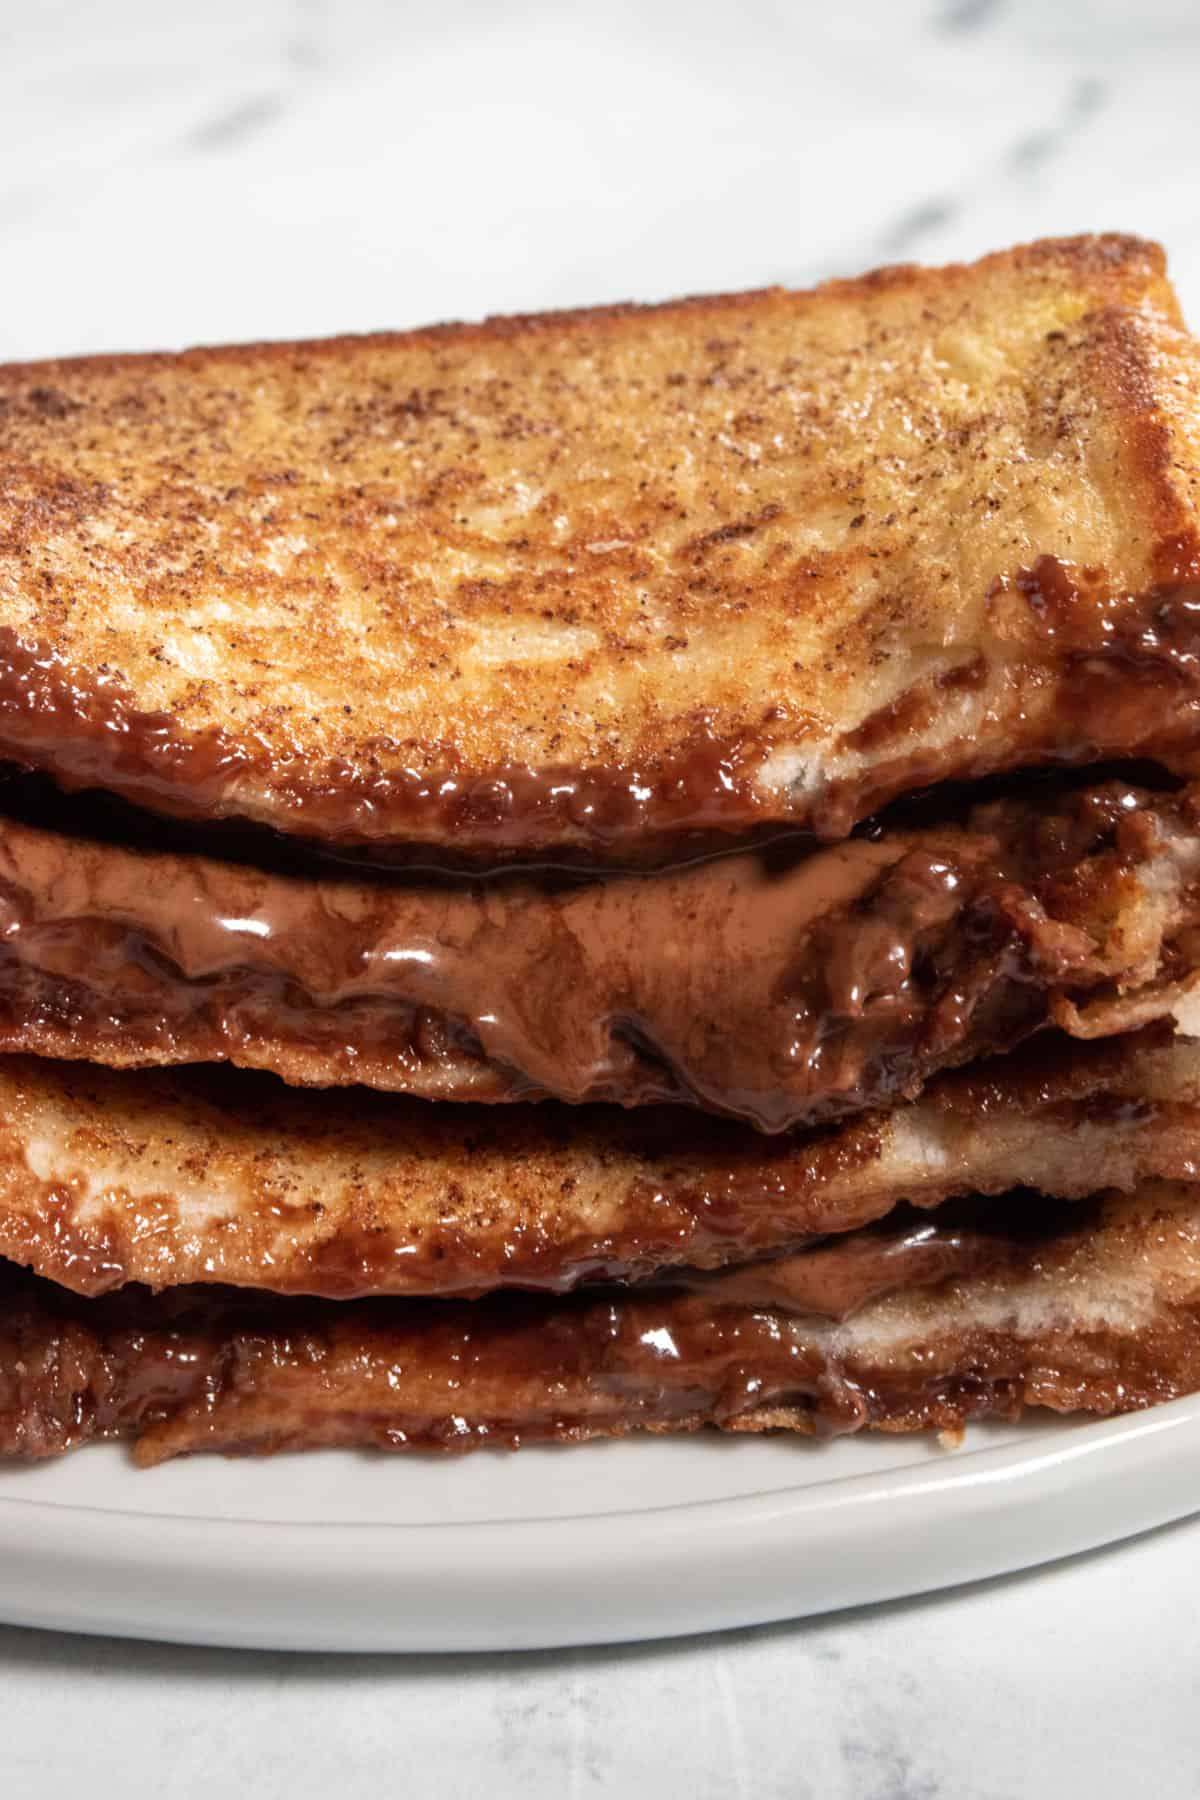 A close up shot of my vegan chocolate french toast, stacked. Thick chocolate oozes out.